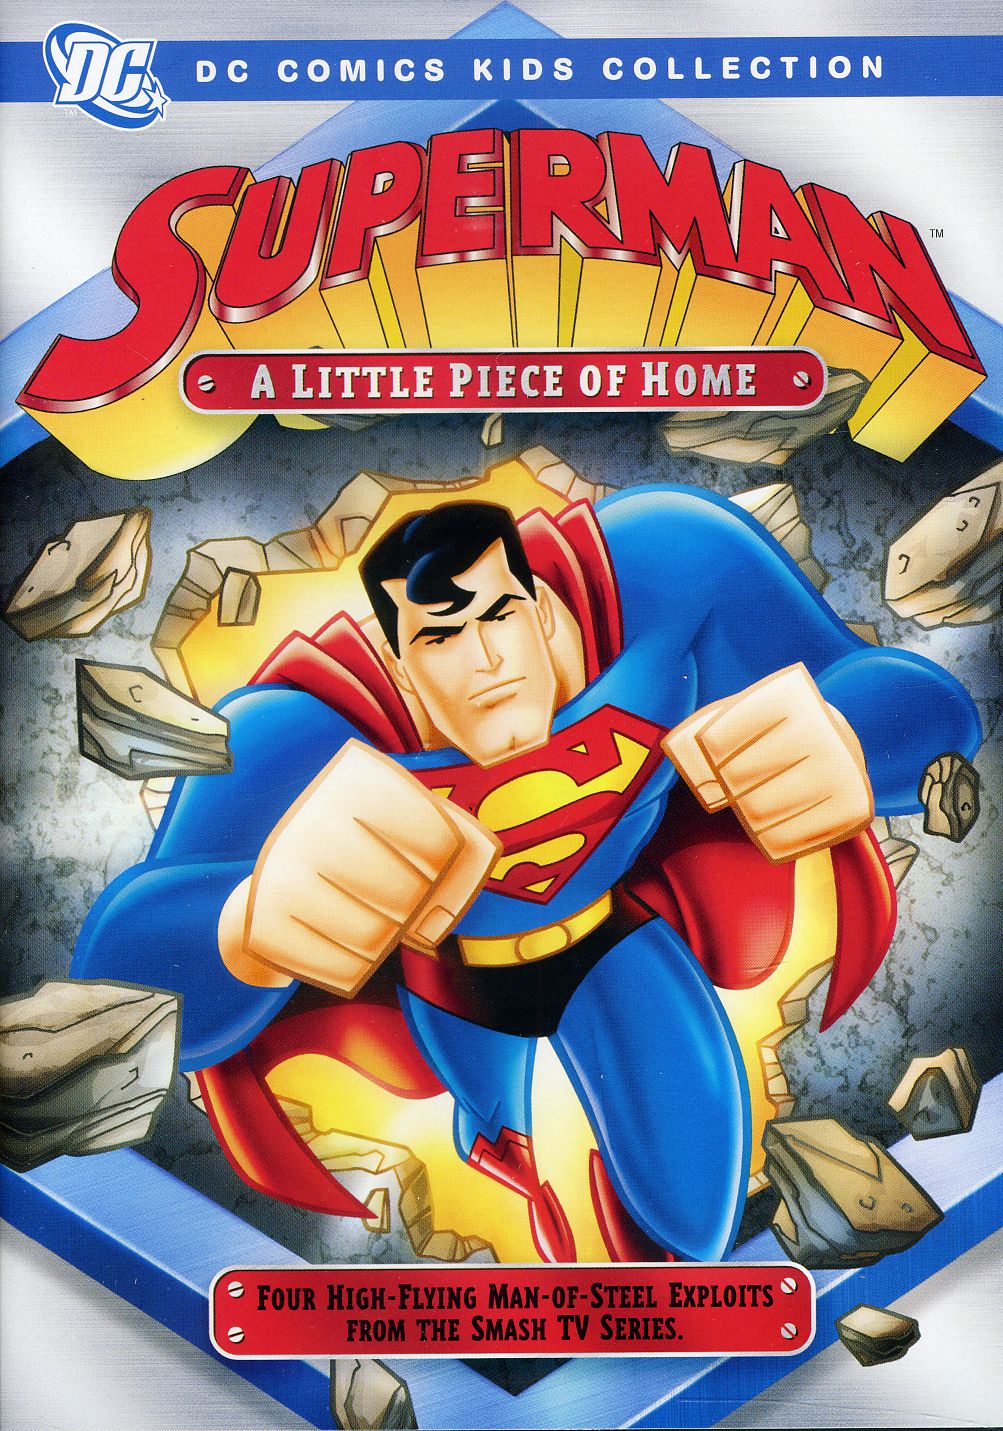 SUPERMAN ANIMATED SERIES: A LITTLE PIECE OF HOME